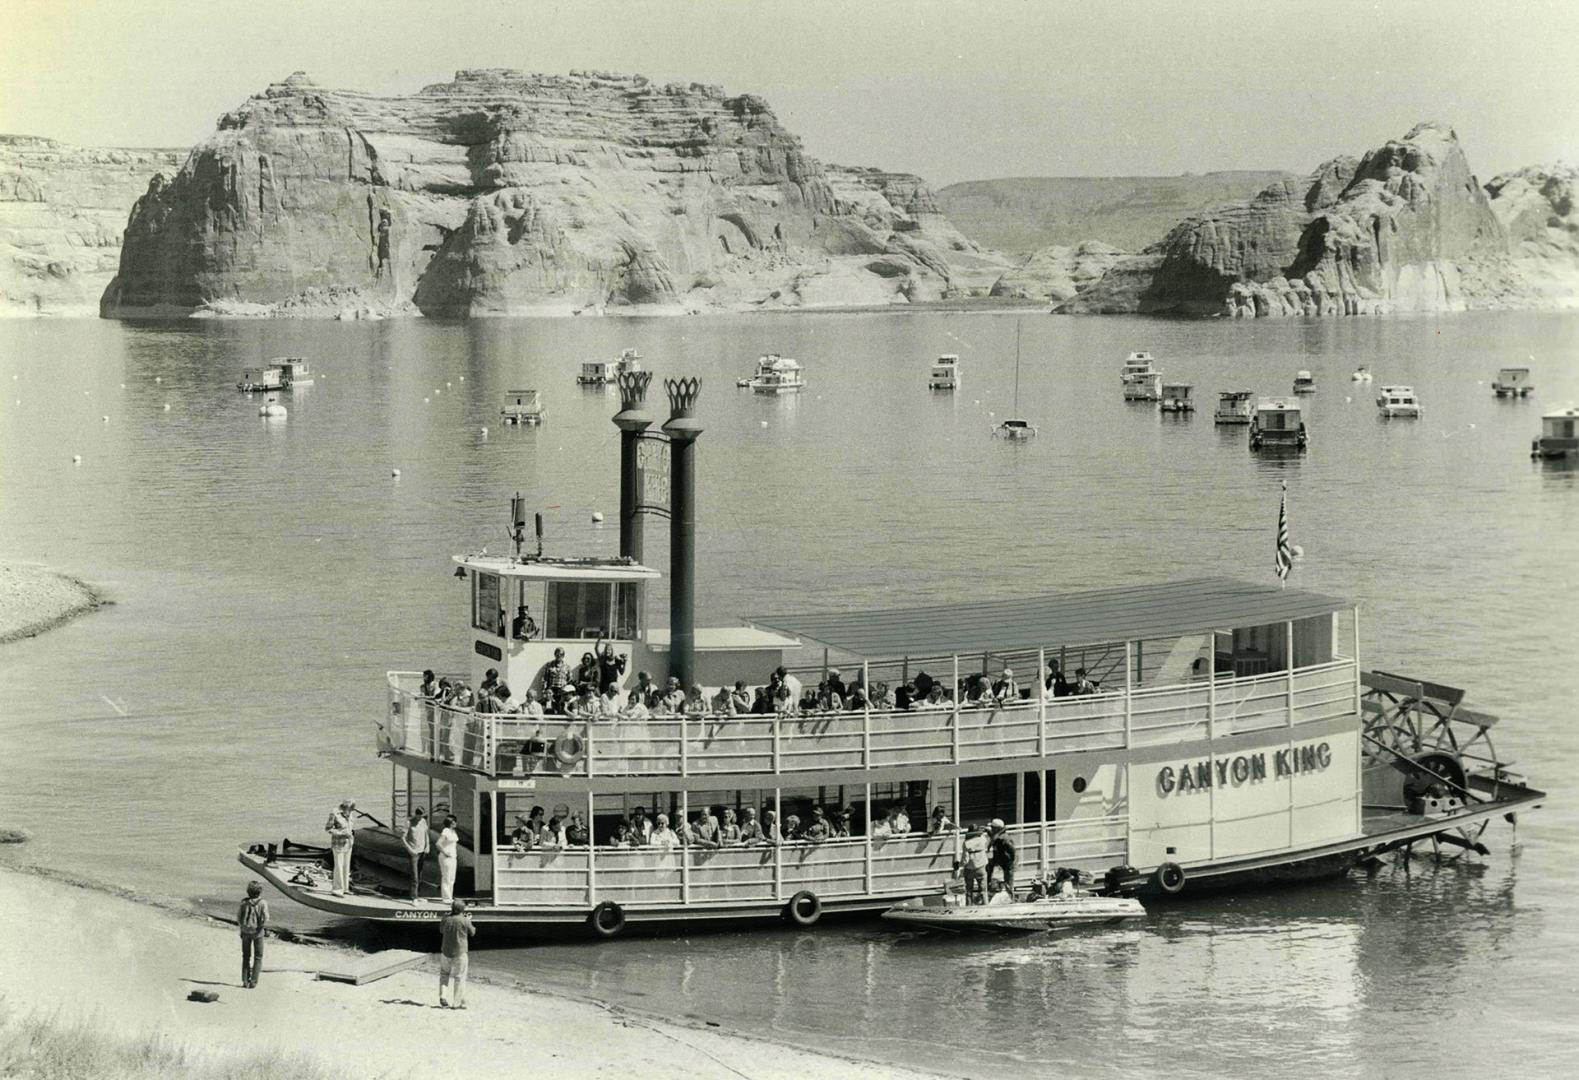 The paddle-wheeler Canyon King unloads passengers on the shores of Lake Powell, a man-made ocean that gleams like a blue jewel amidst the red rock of Arizona